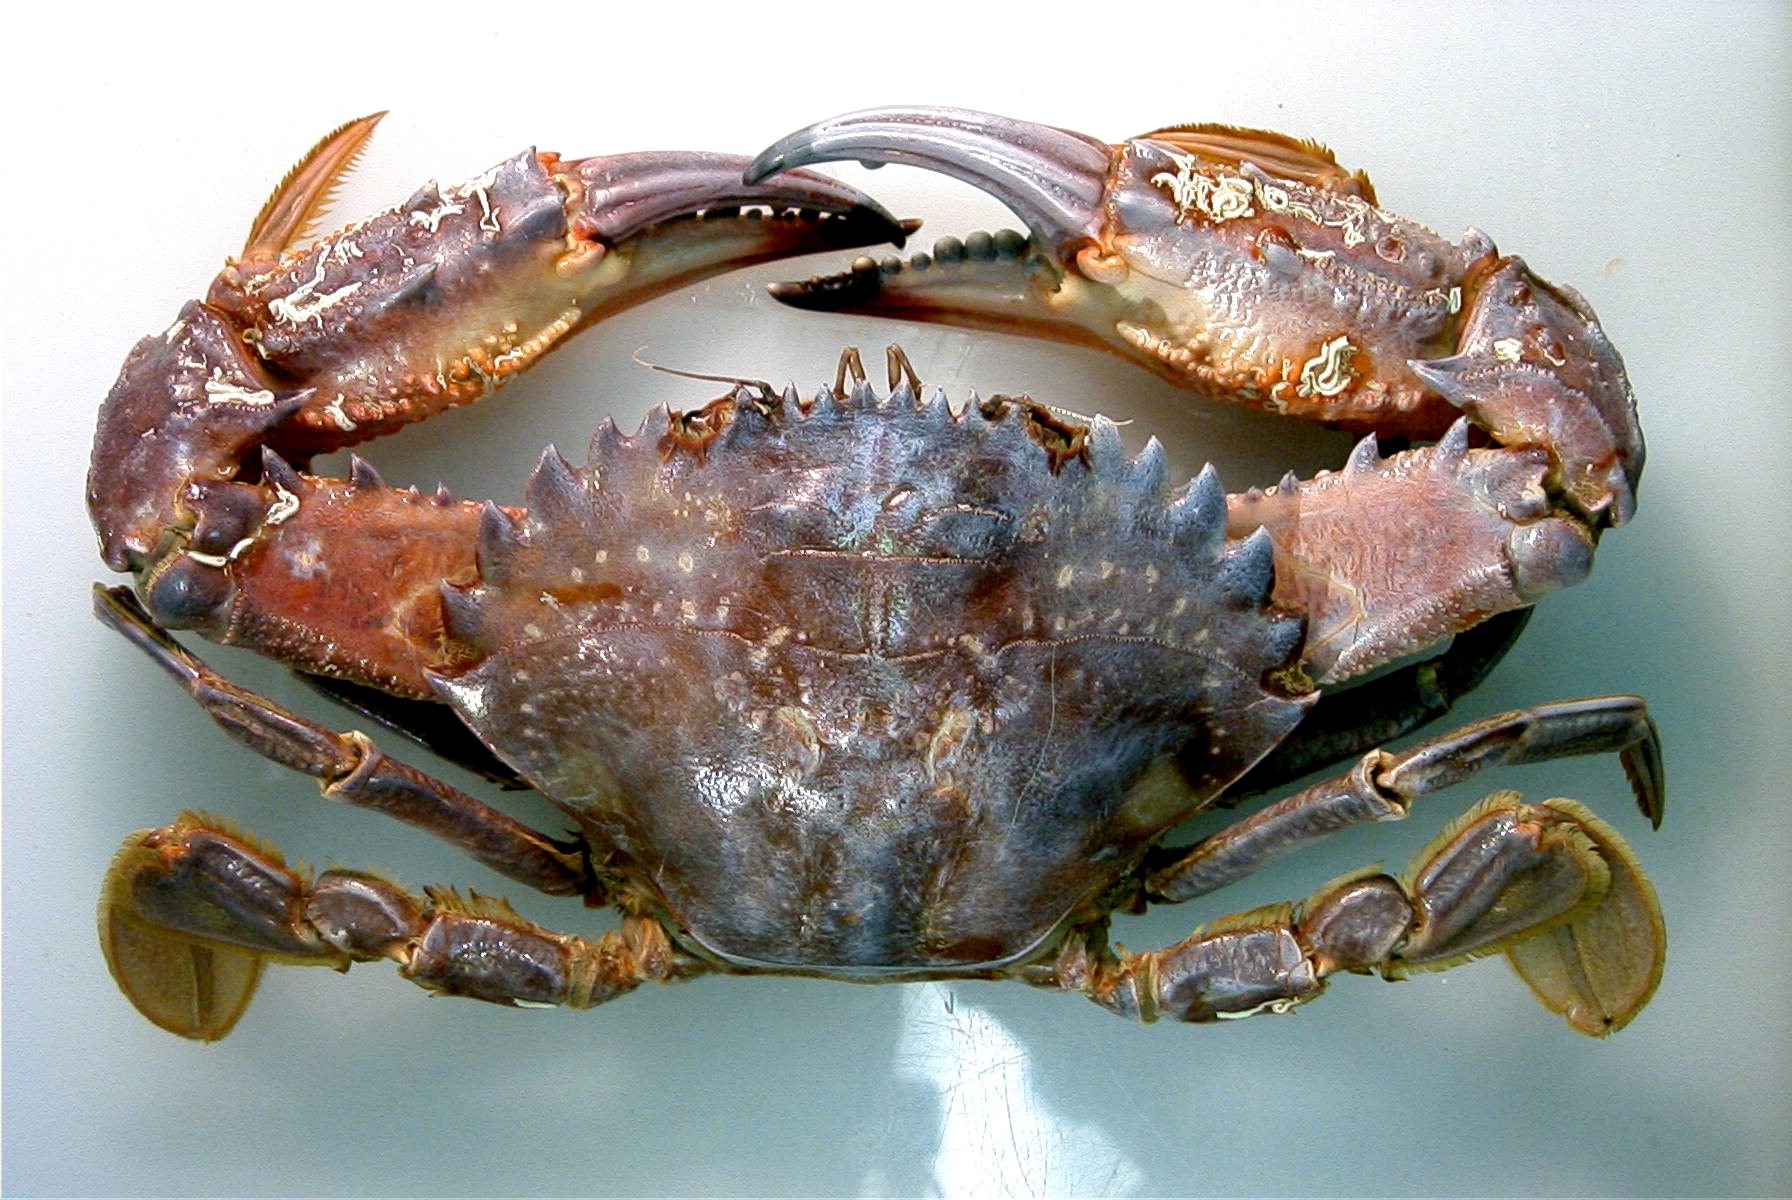 <p><em>Charybdis japonica</em>. This crab has not recently moulted and some tube worms have settled on the shell.</p>
